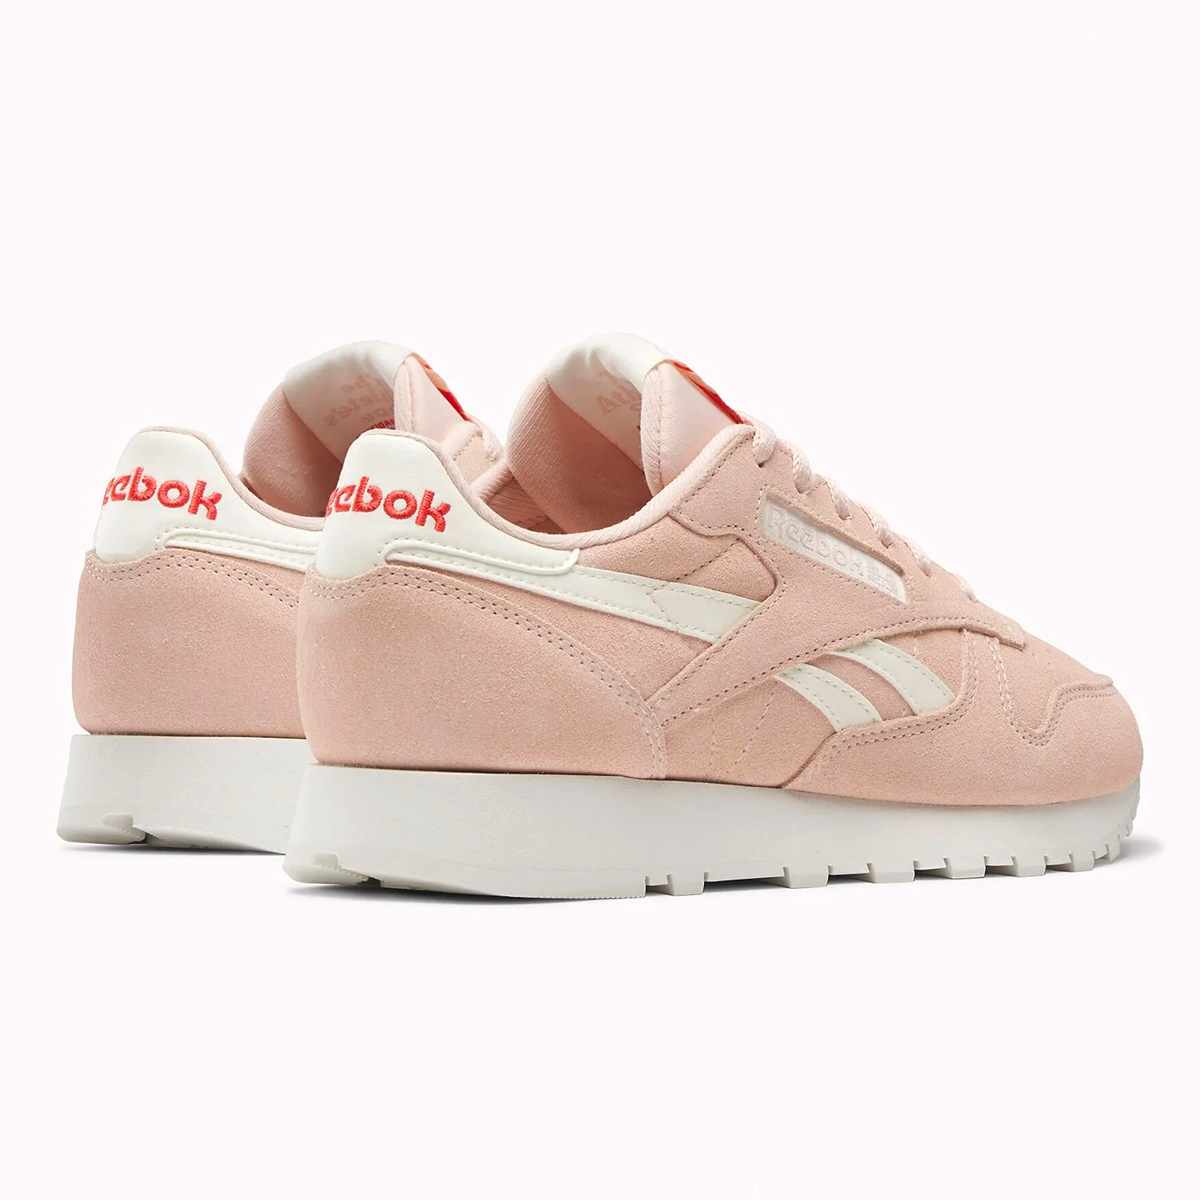 Classic Leather Suede - Possibly Pink